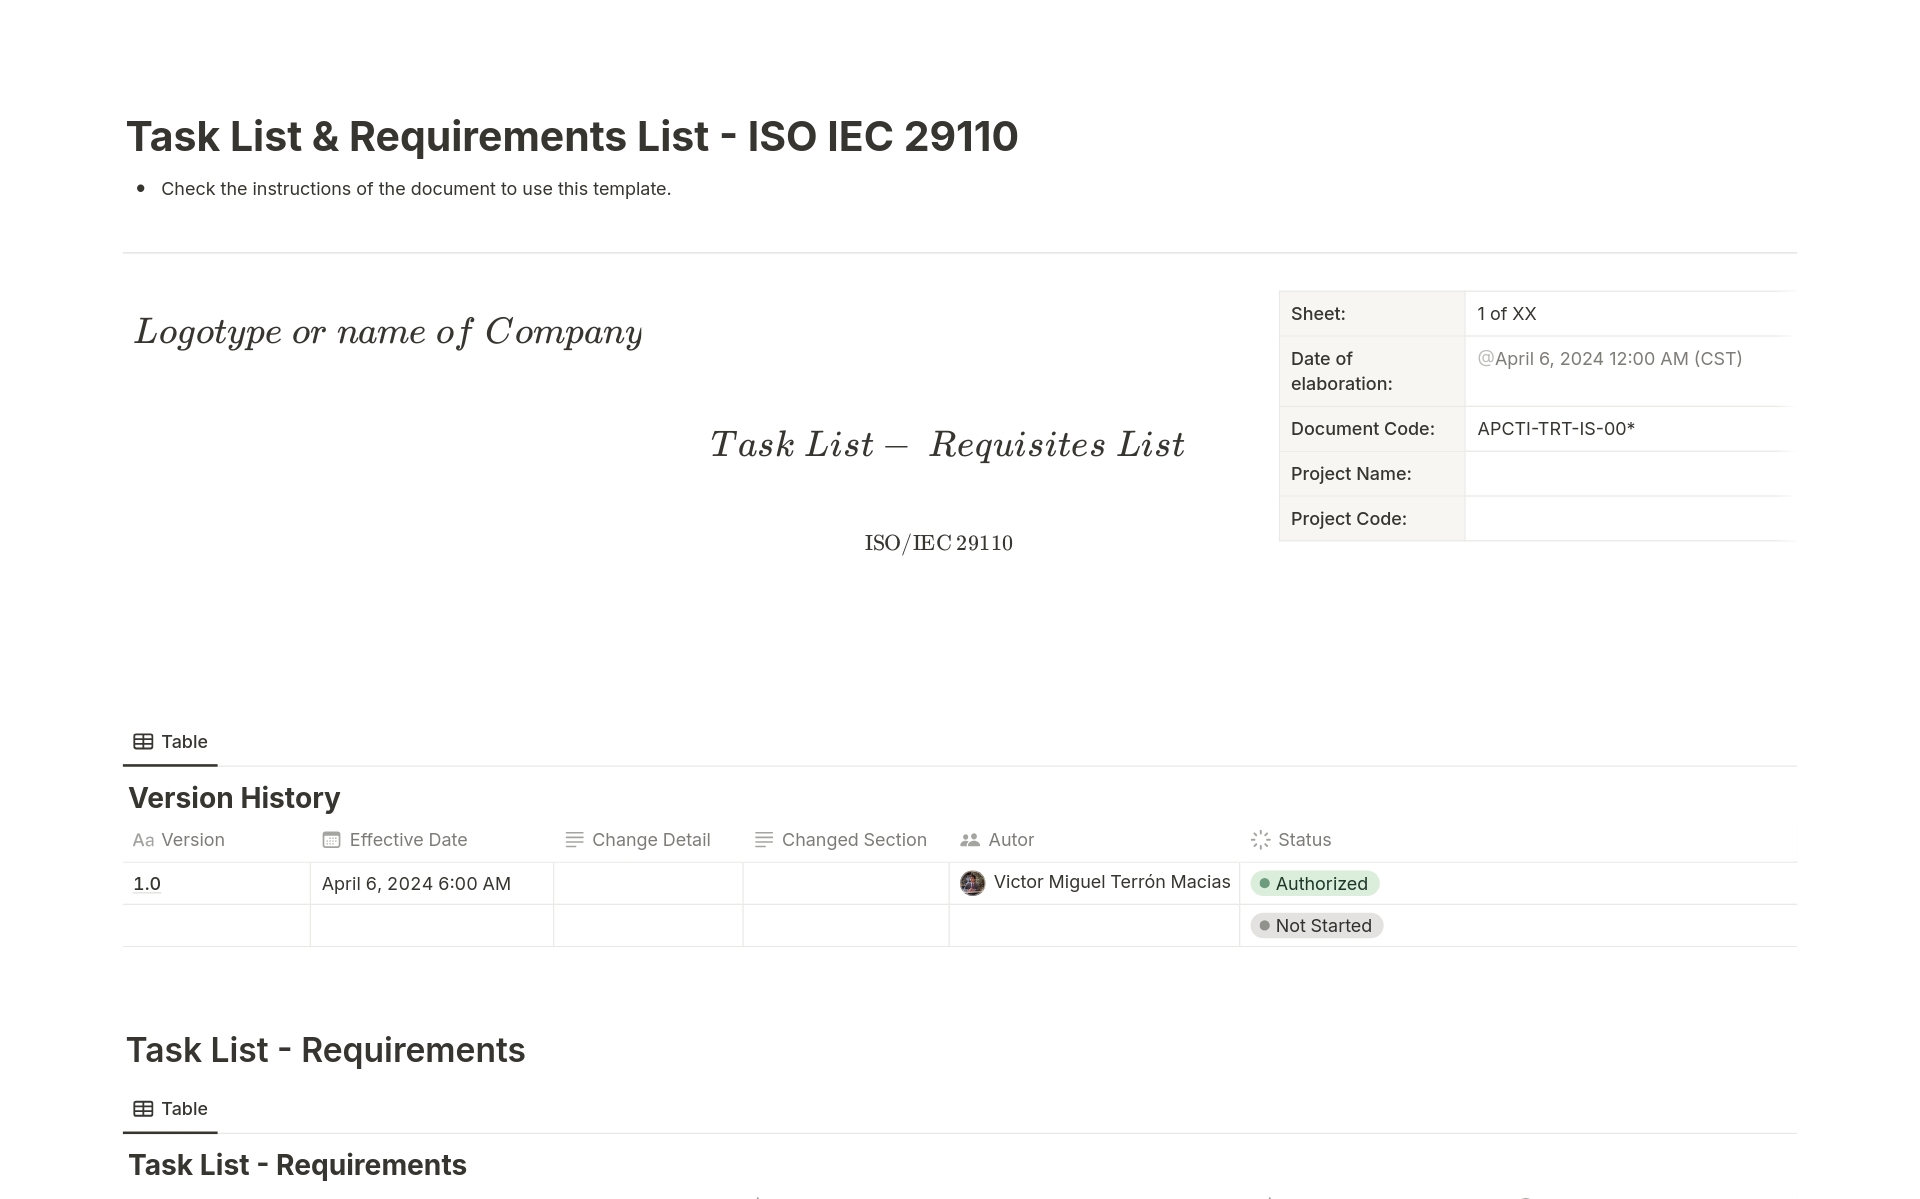 This Notion template aligns with ISO/IEC standards specifications, providing an automated template version control table. With this tool, you can easily add multiple collaborators to your workspace and keep an enhanced track of who makes changes.